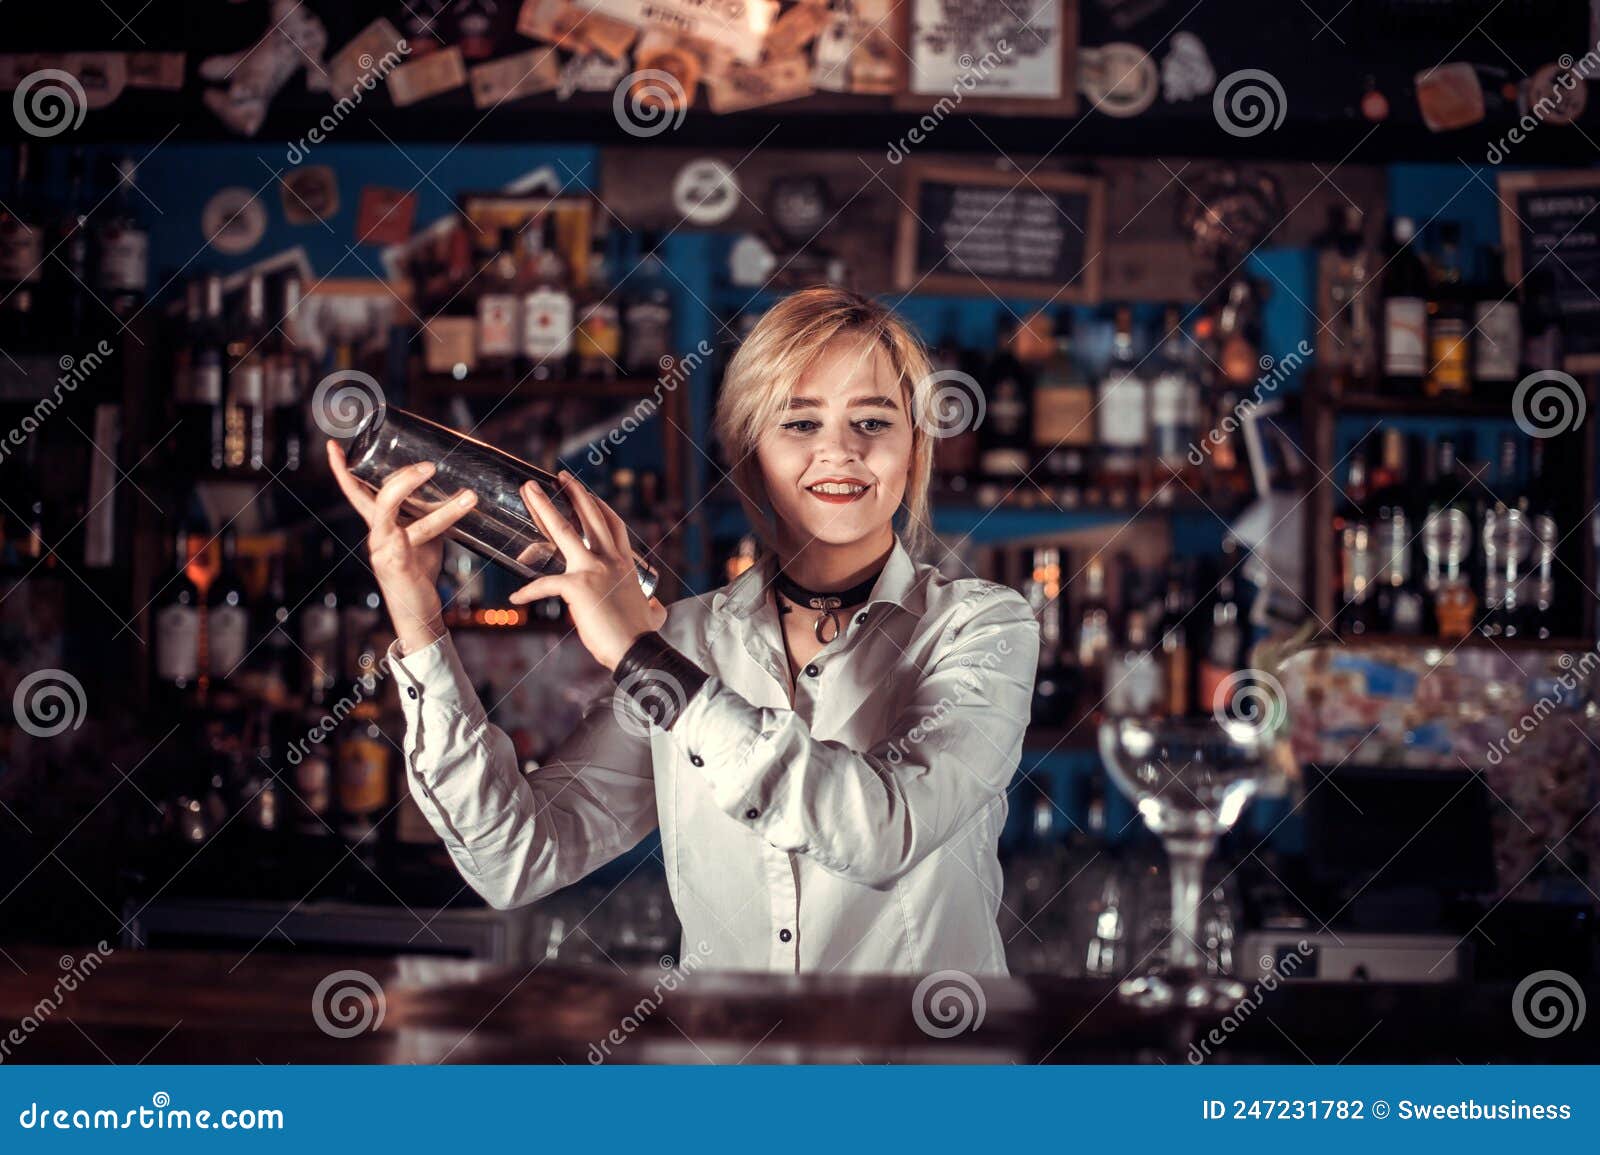 Professional Woman Barman Mixes a Cocktail on the Bar Stock Photo ...